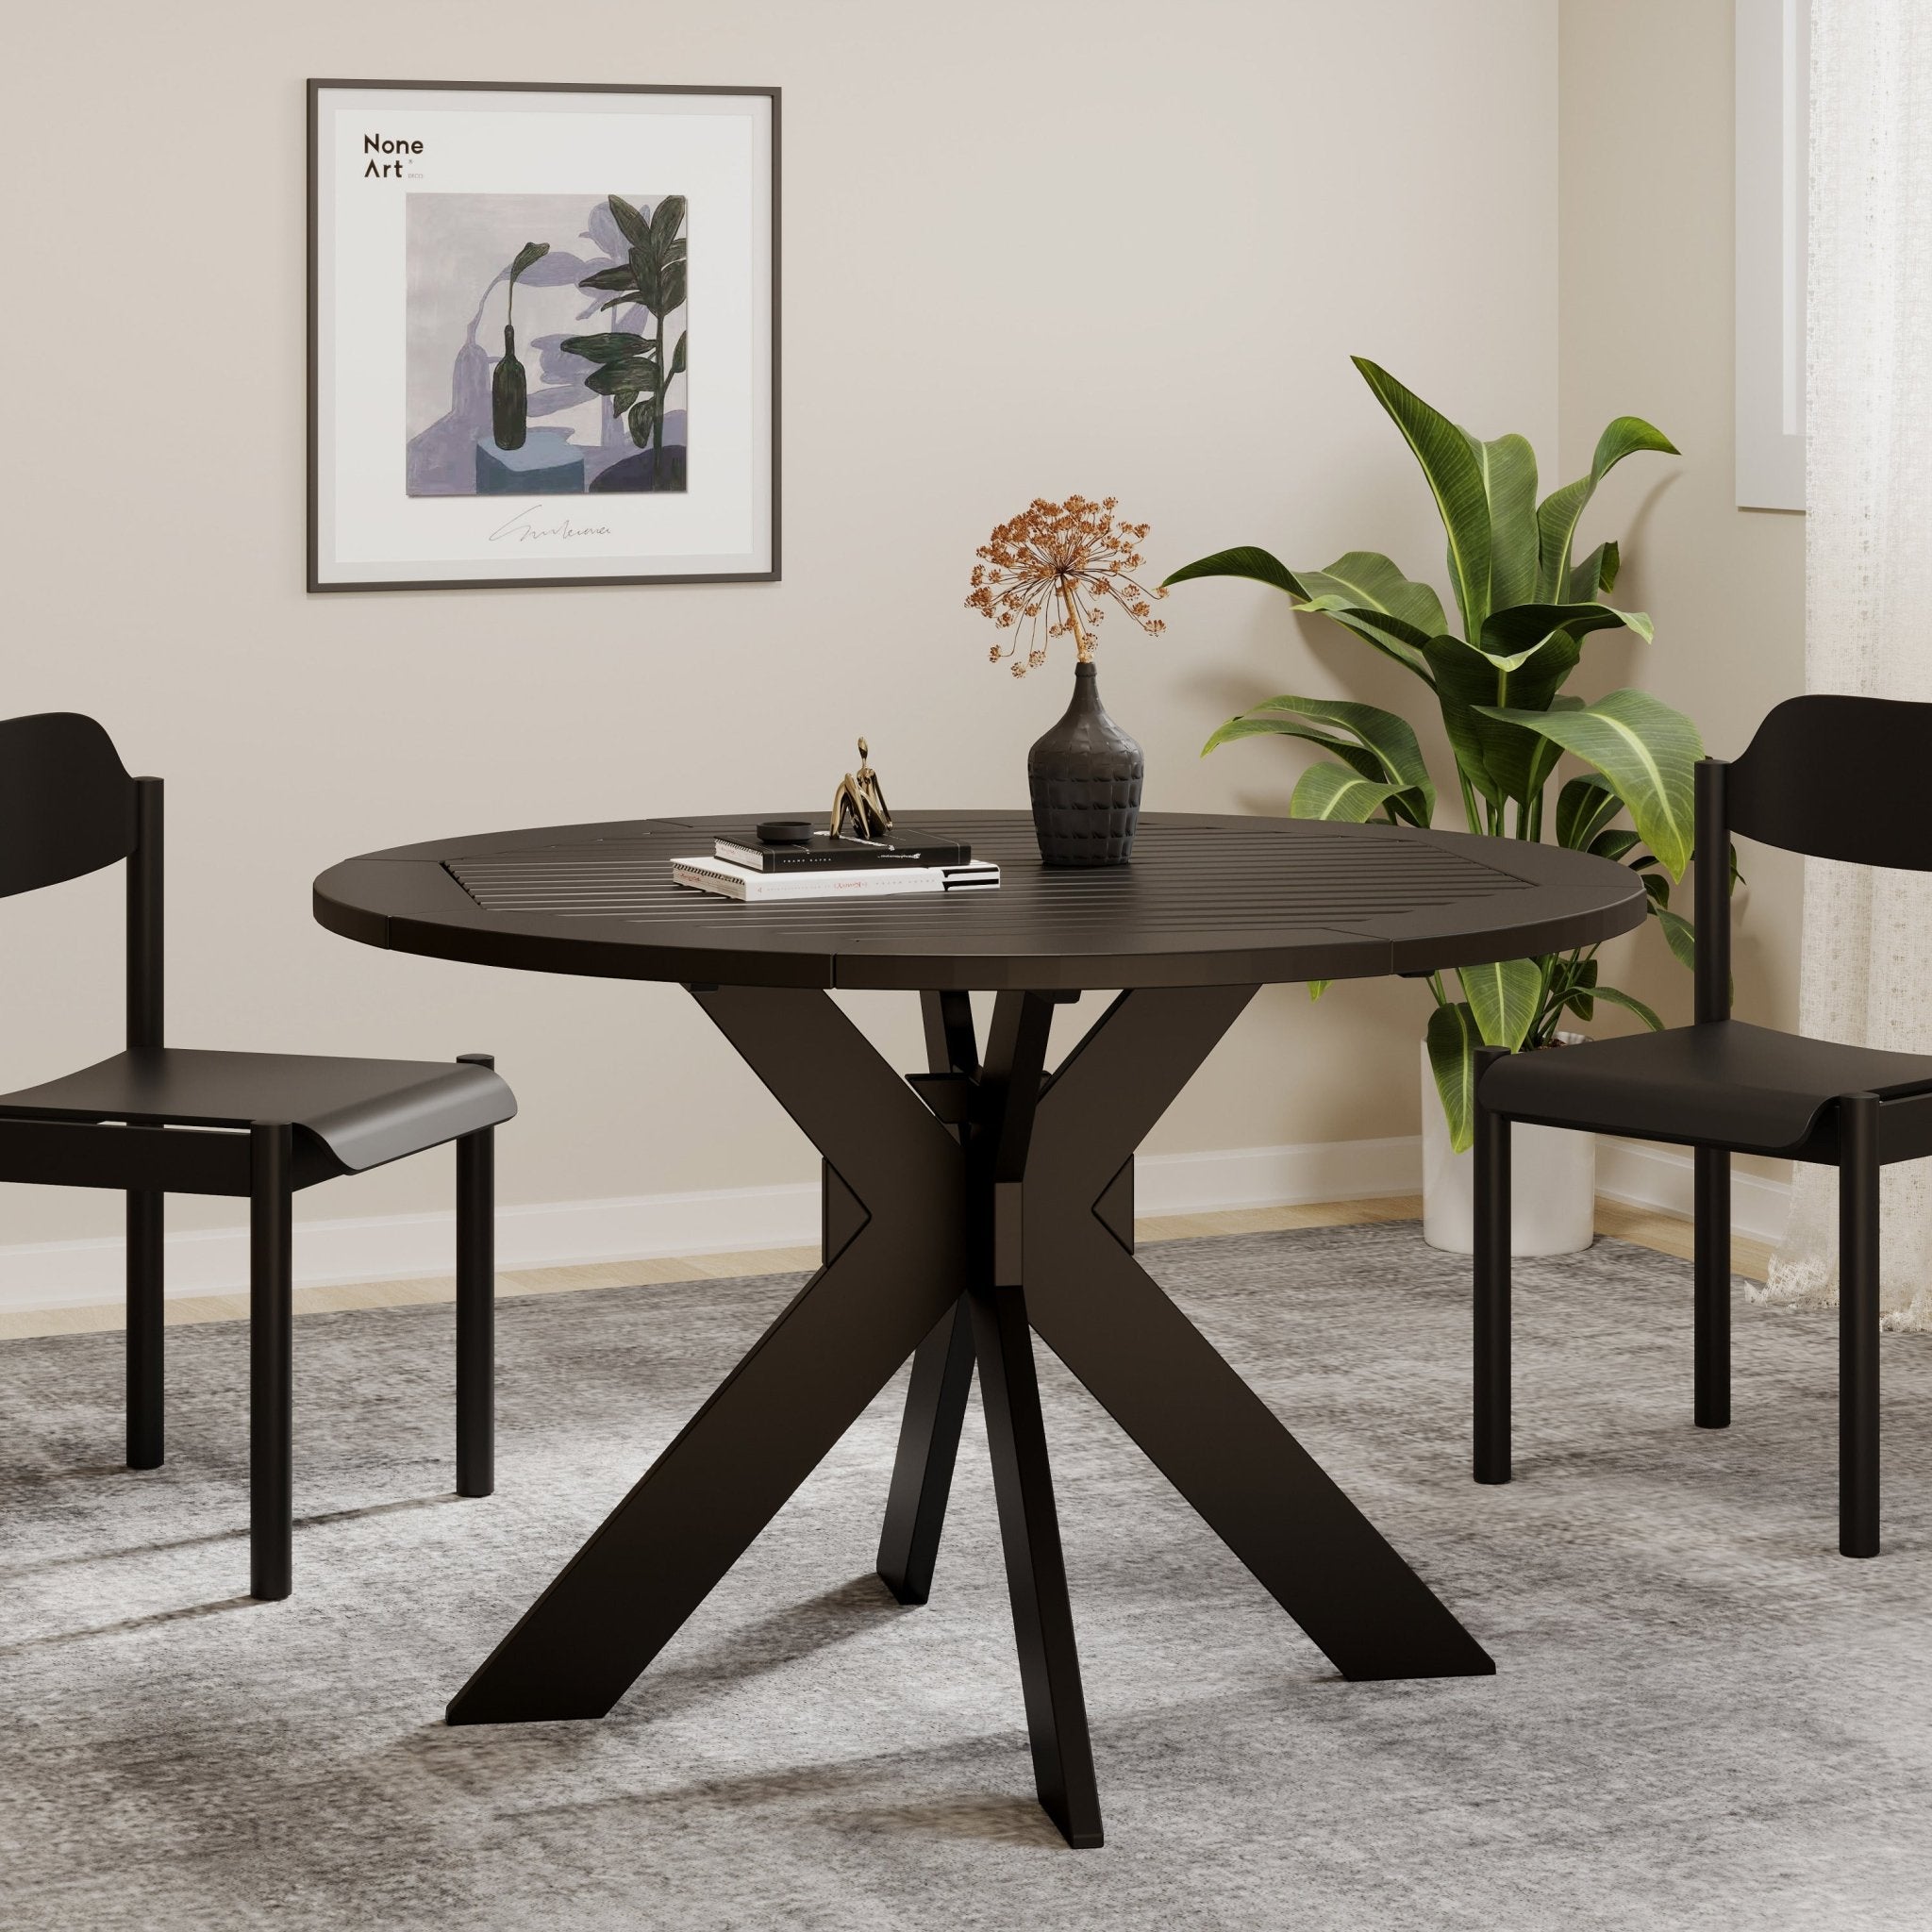 Acacia-Wood--Dining-Table,-Round,-Black-Kitchen-&-Dining-Room-Tables